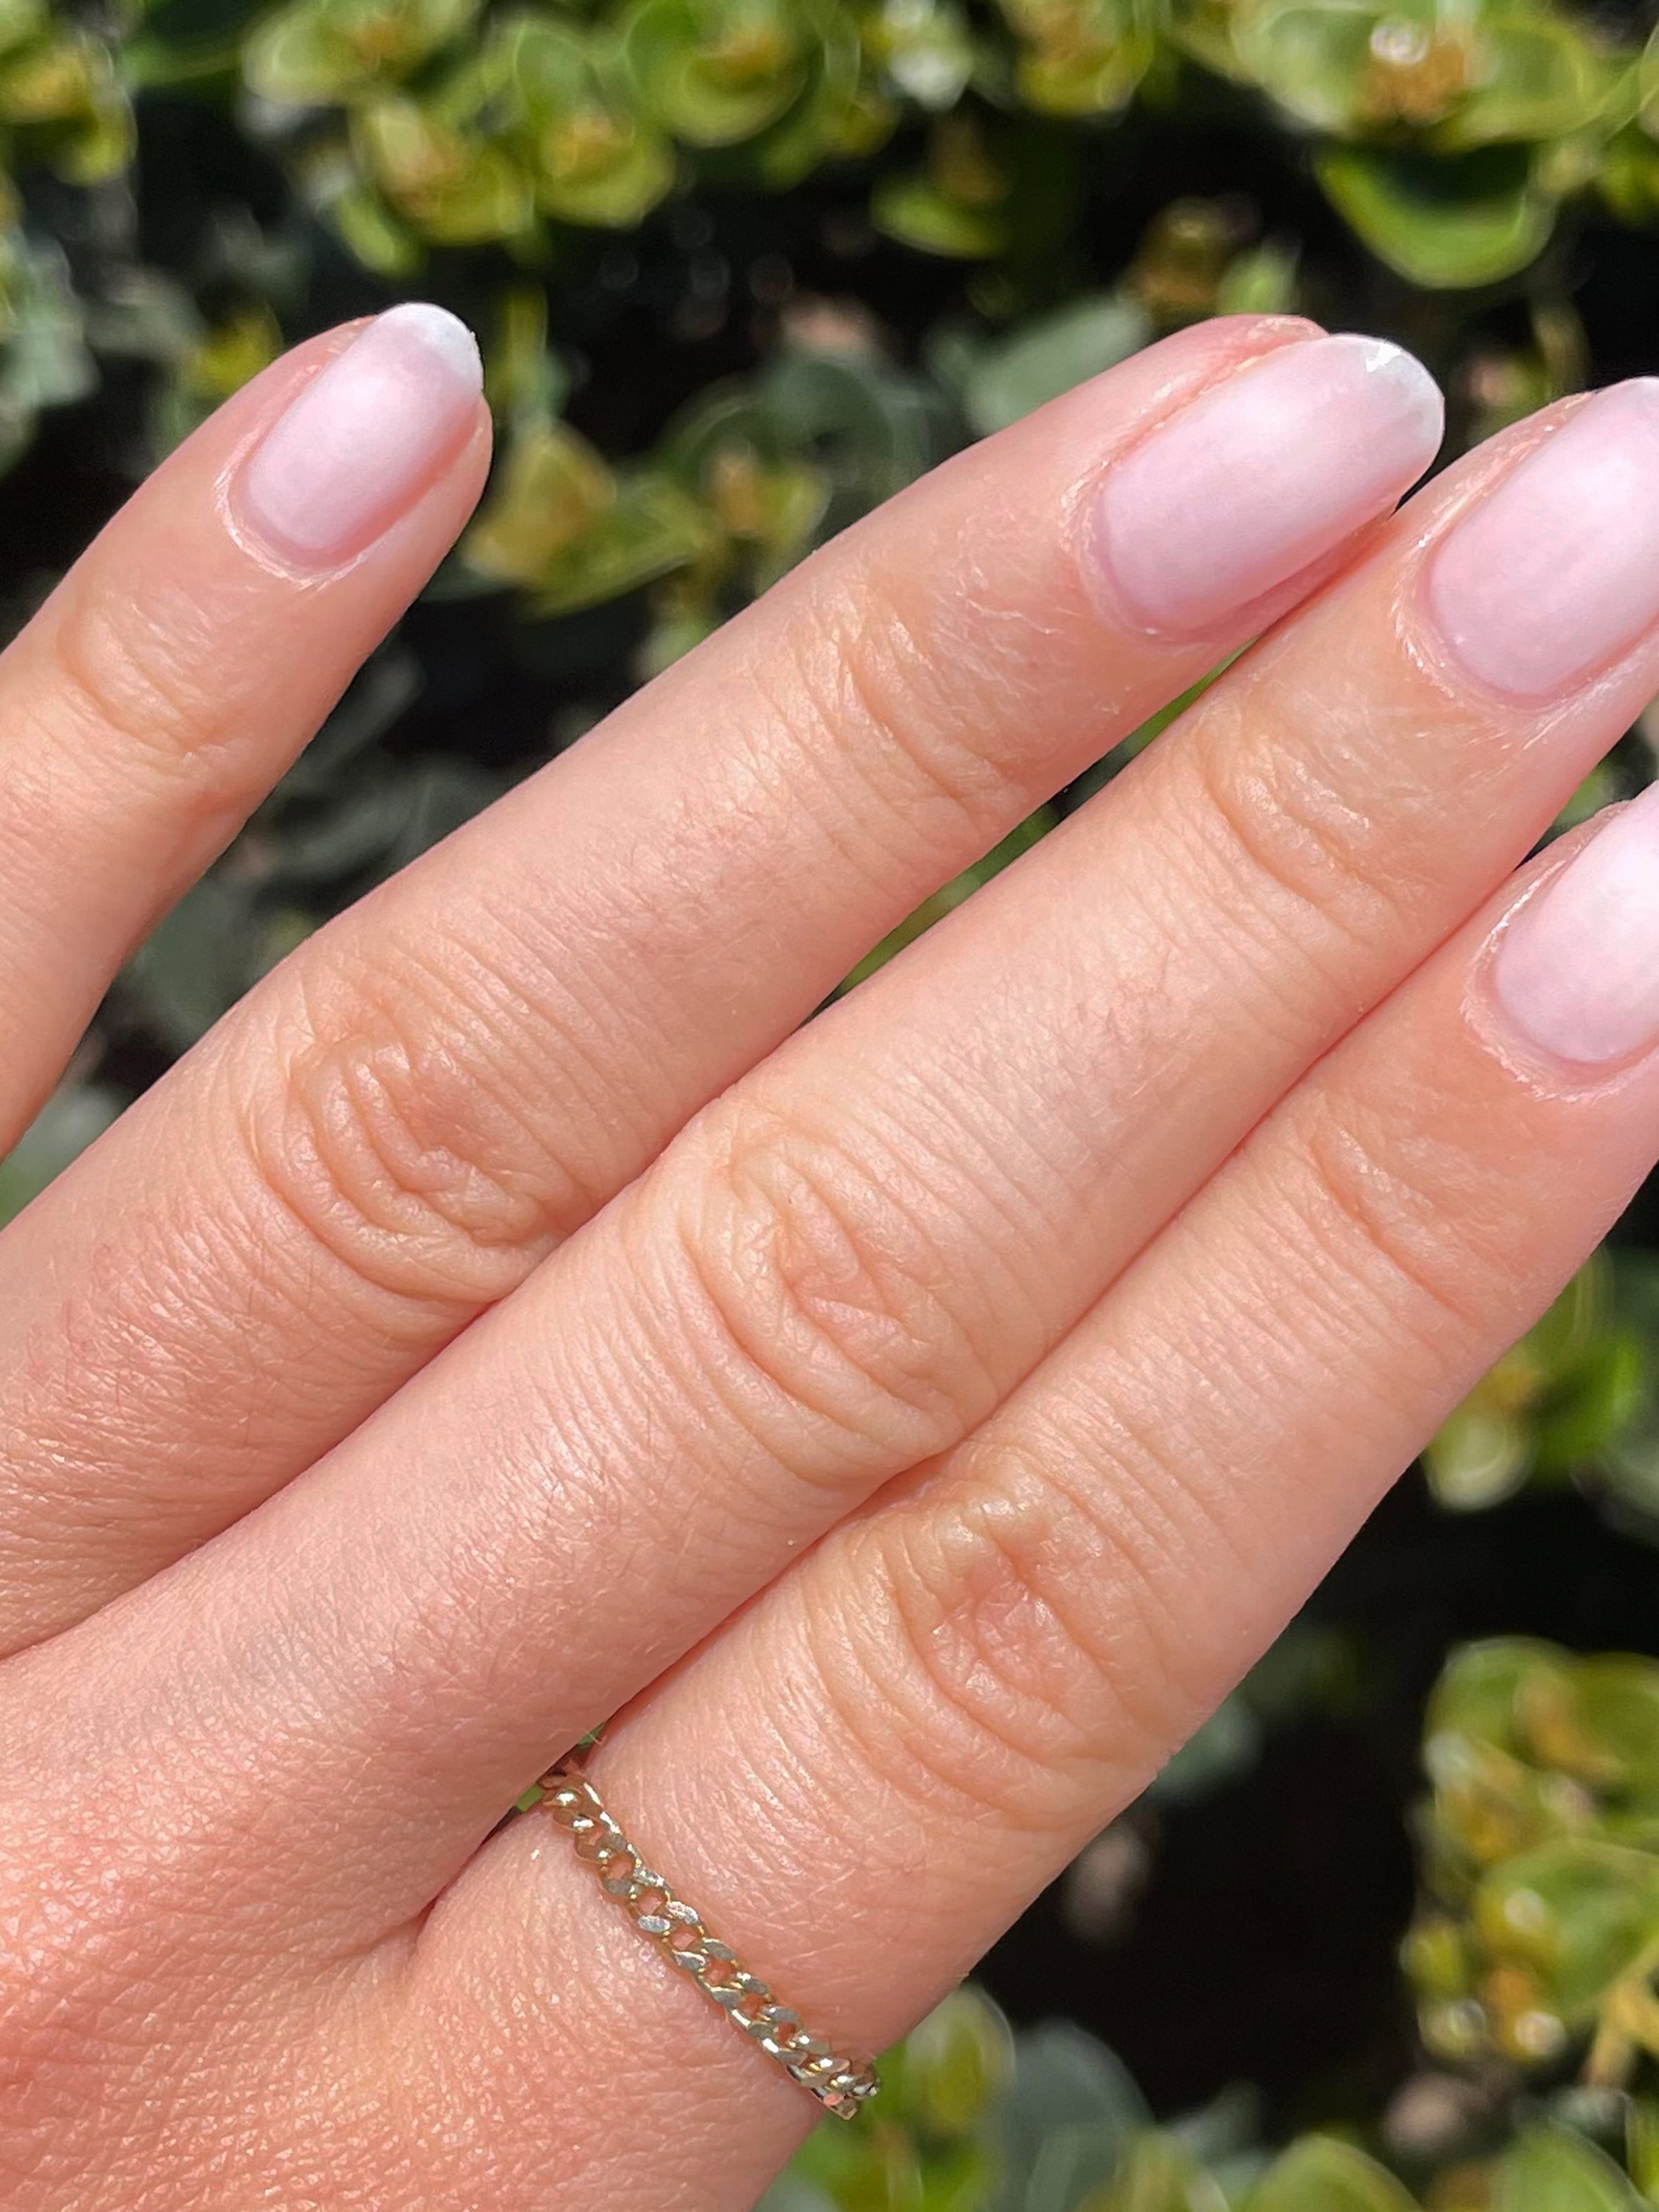 I Tried the Whimsical “Cloud” Nails Celebrities Love